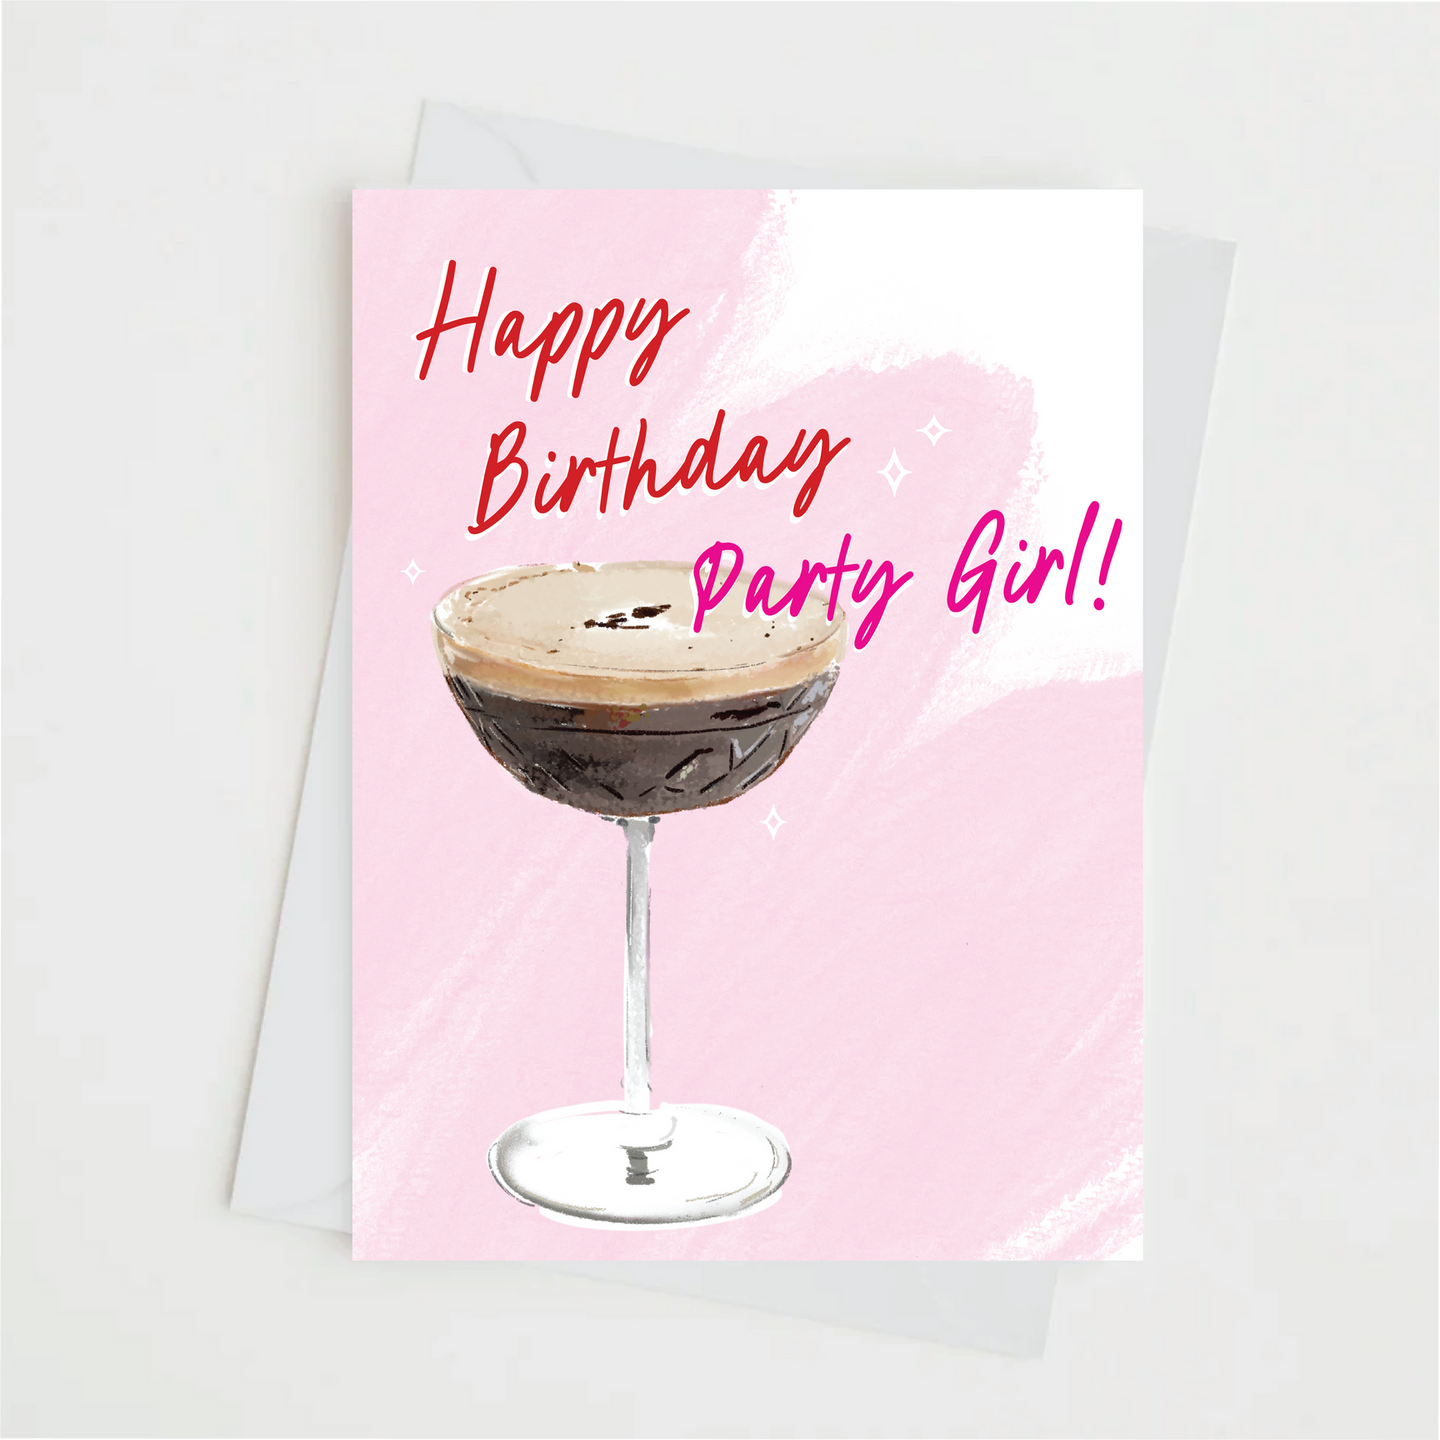 Happy Birthday Party Girl Greeting Card - Set of 6